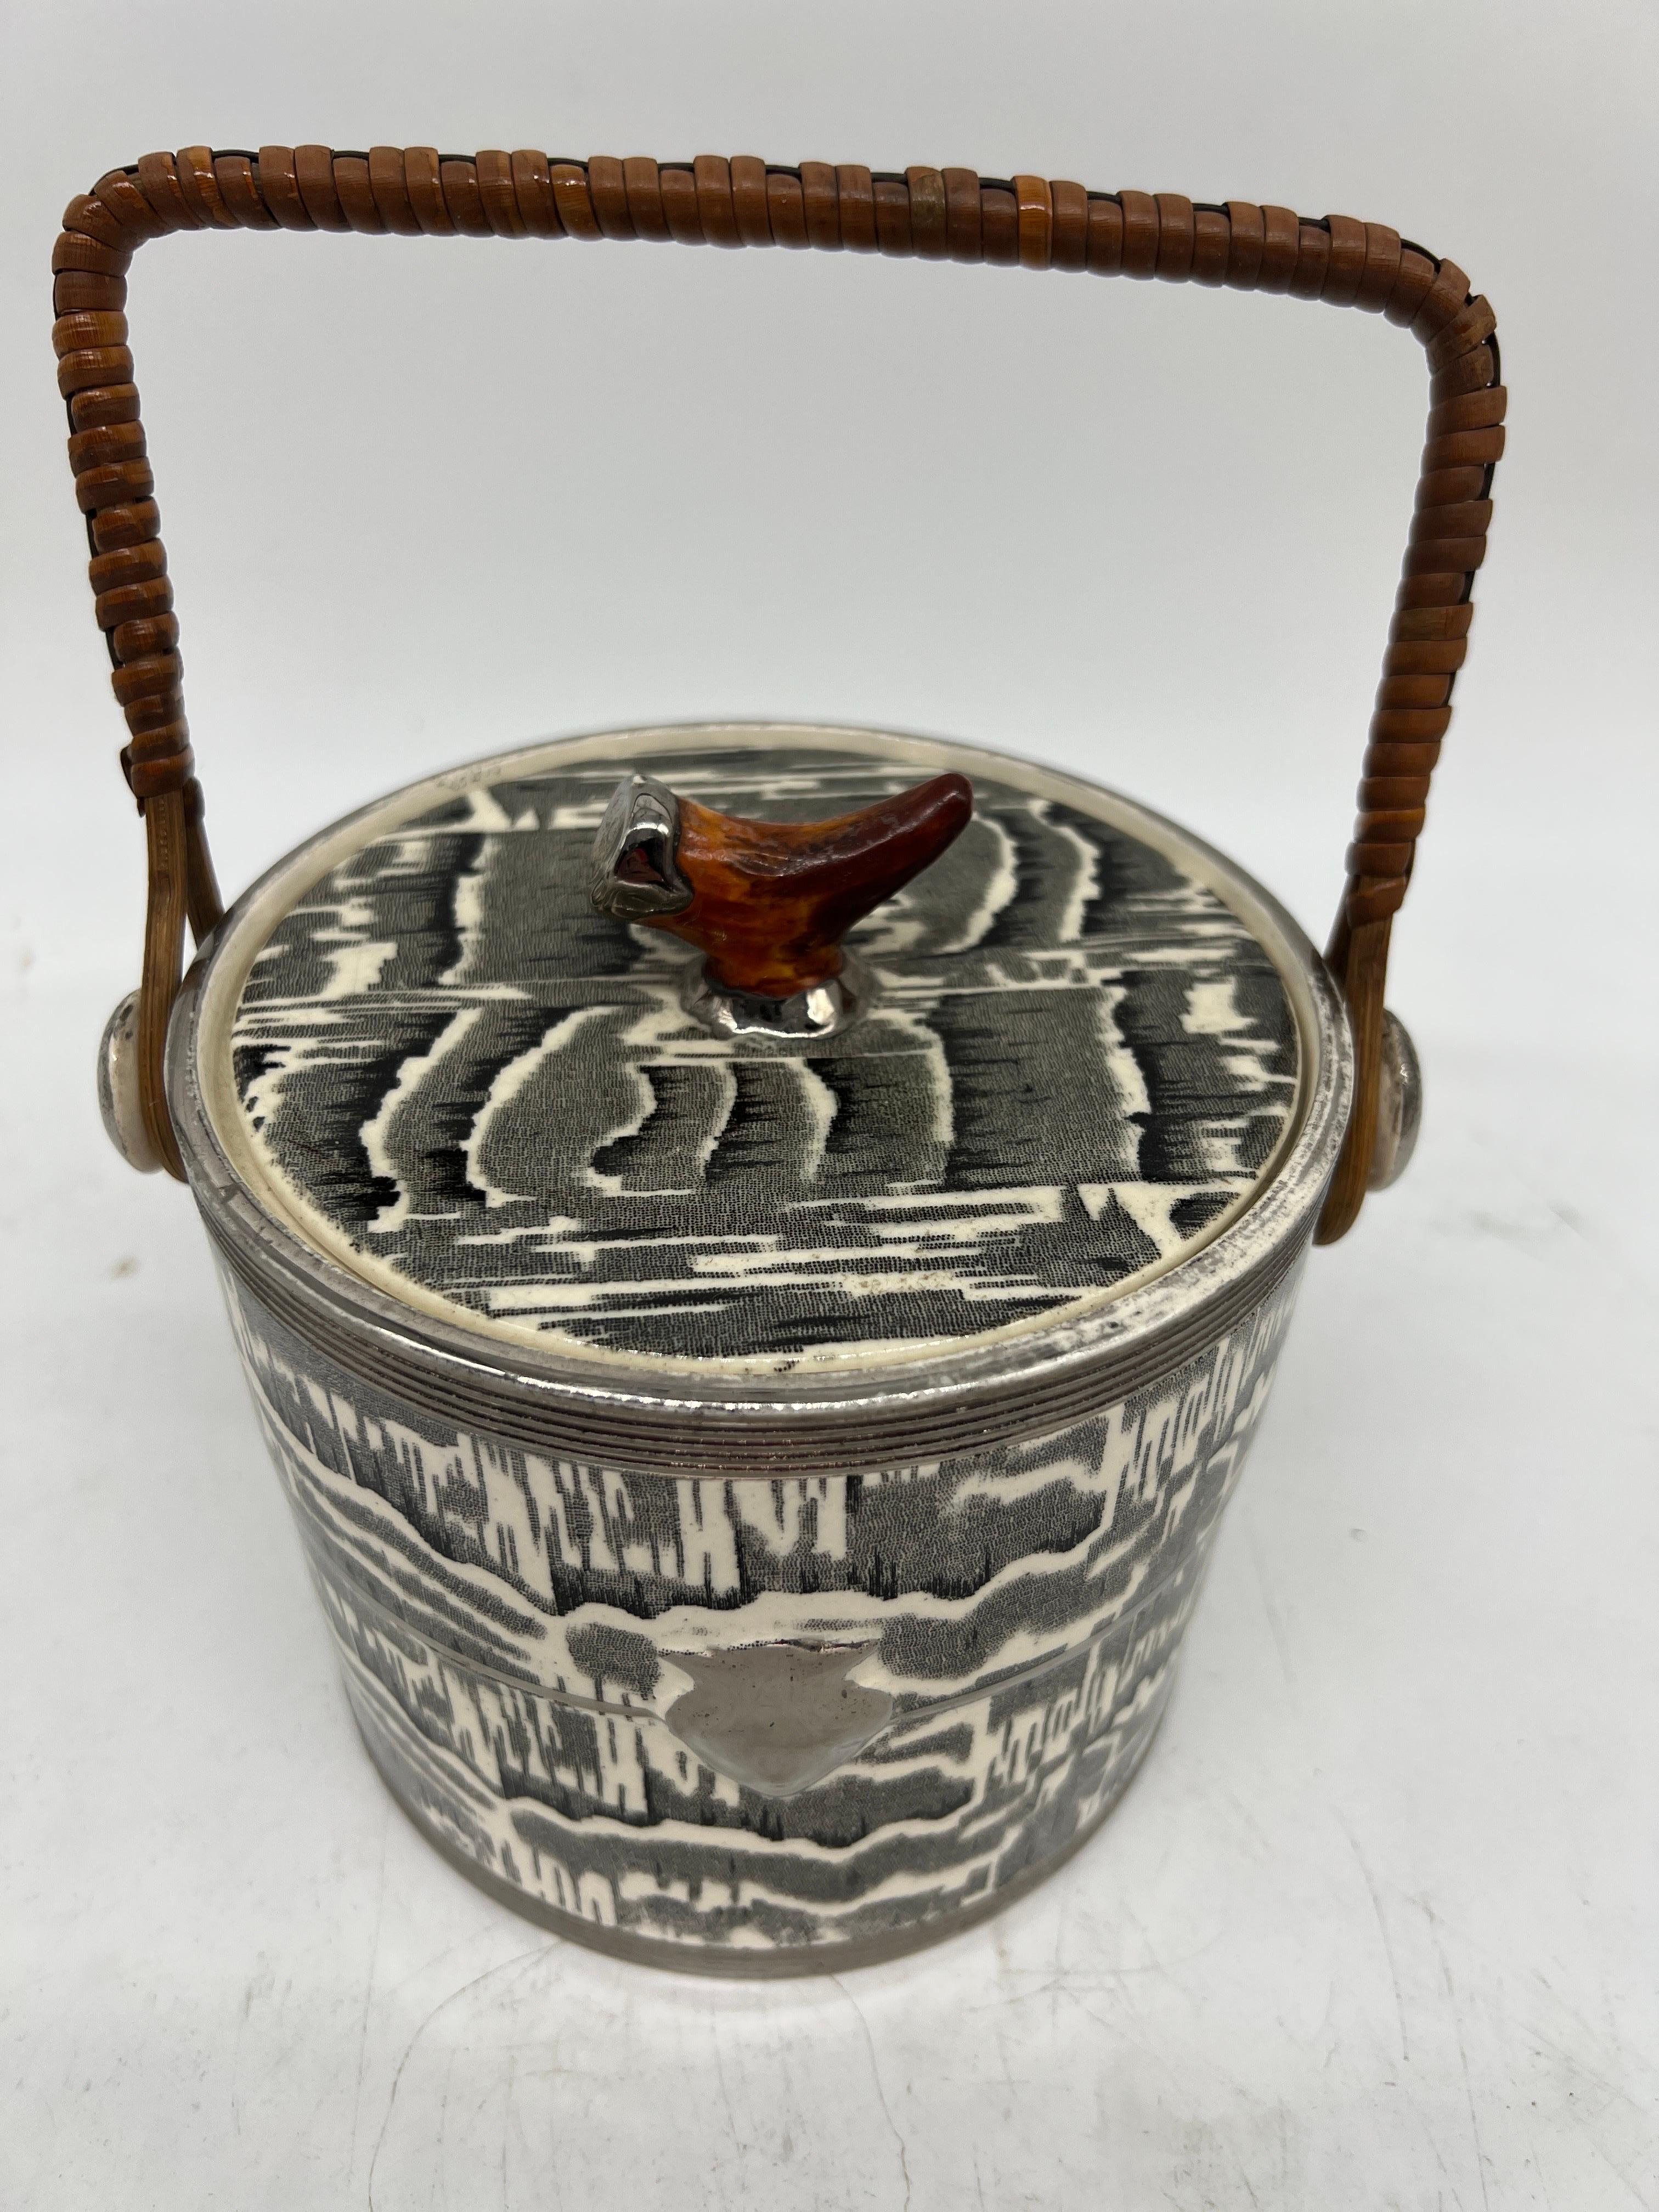 Arthur Wood (English, circa 1930). 

A biscuit barrel made with a ceramic body having faux marbleized surface, wicker handle and a black forest style antler painted finial. Marked to underside appropriately.